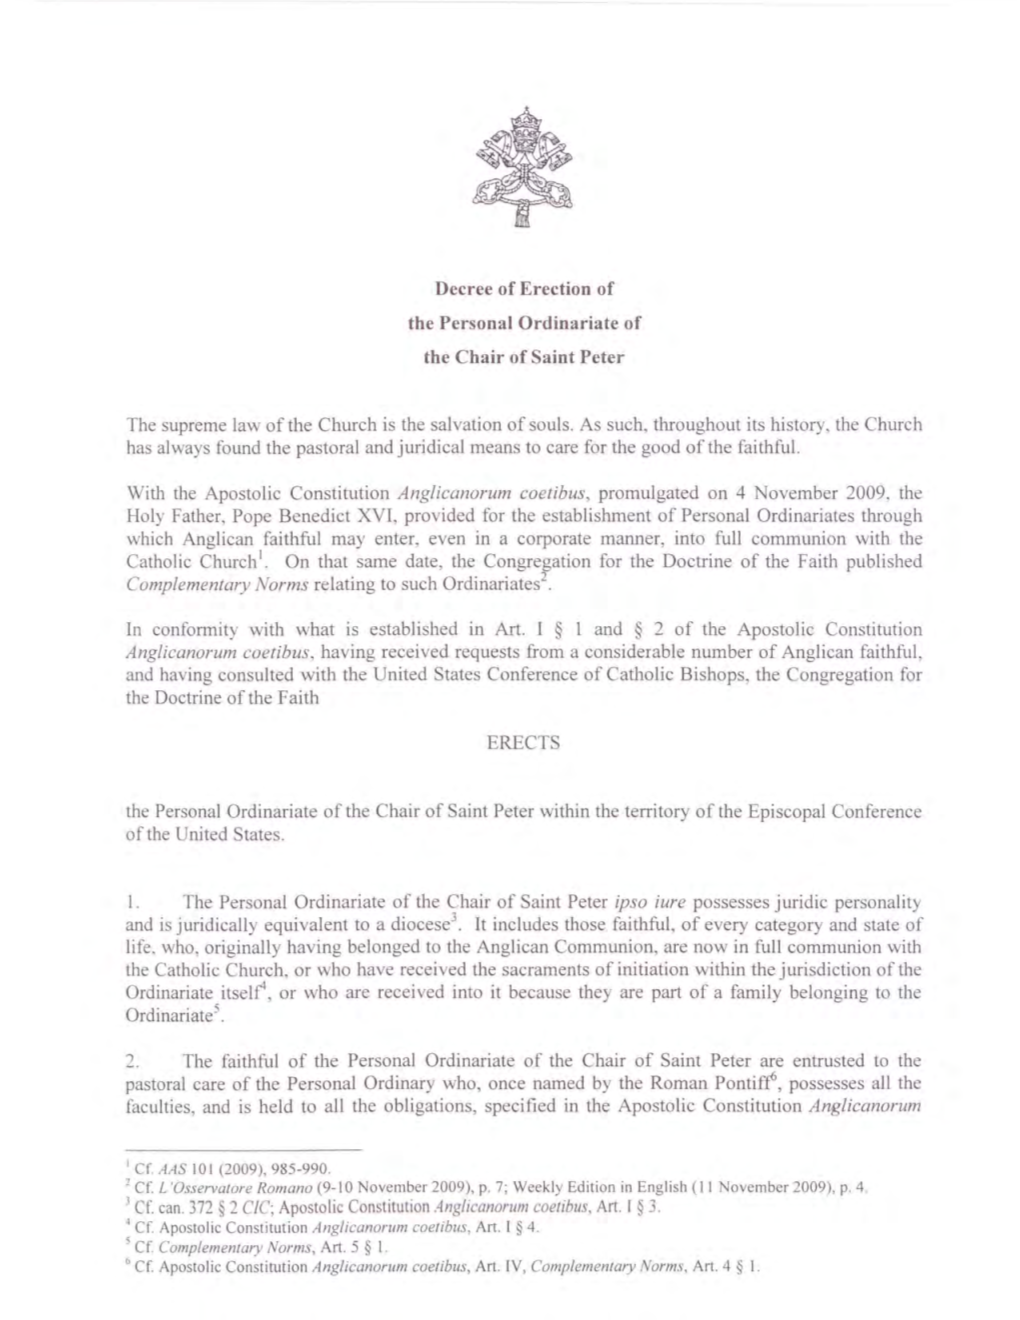 Decree of Erection of the Personal Ordinariate of the Chair of Saint Peter